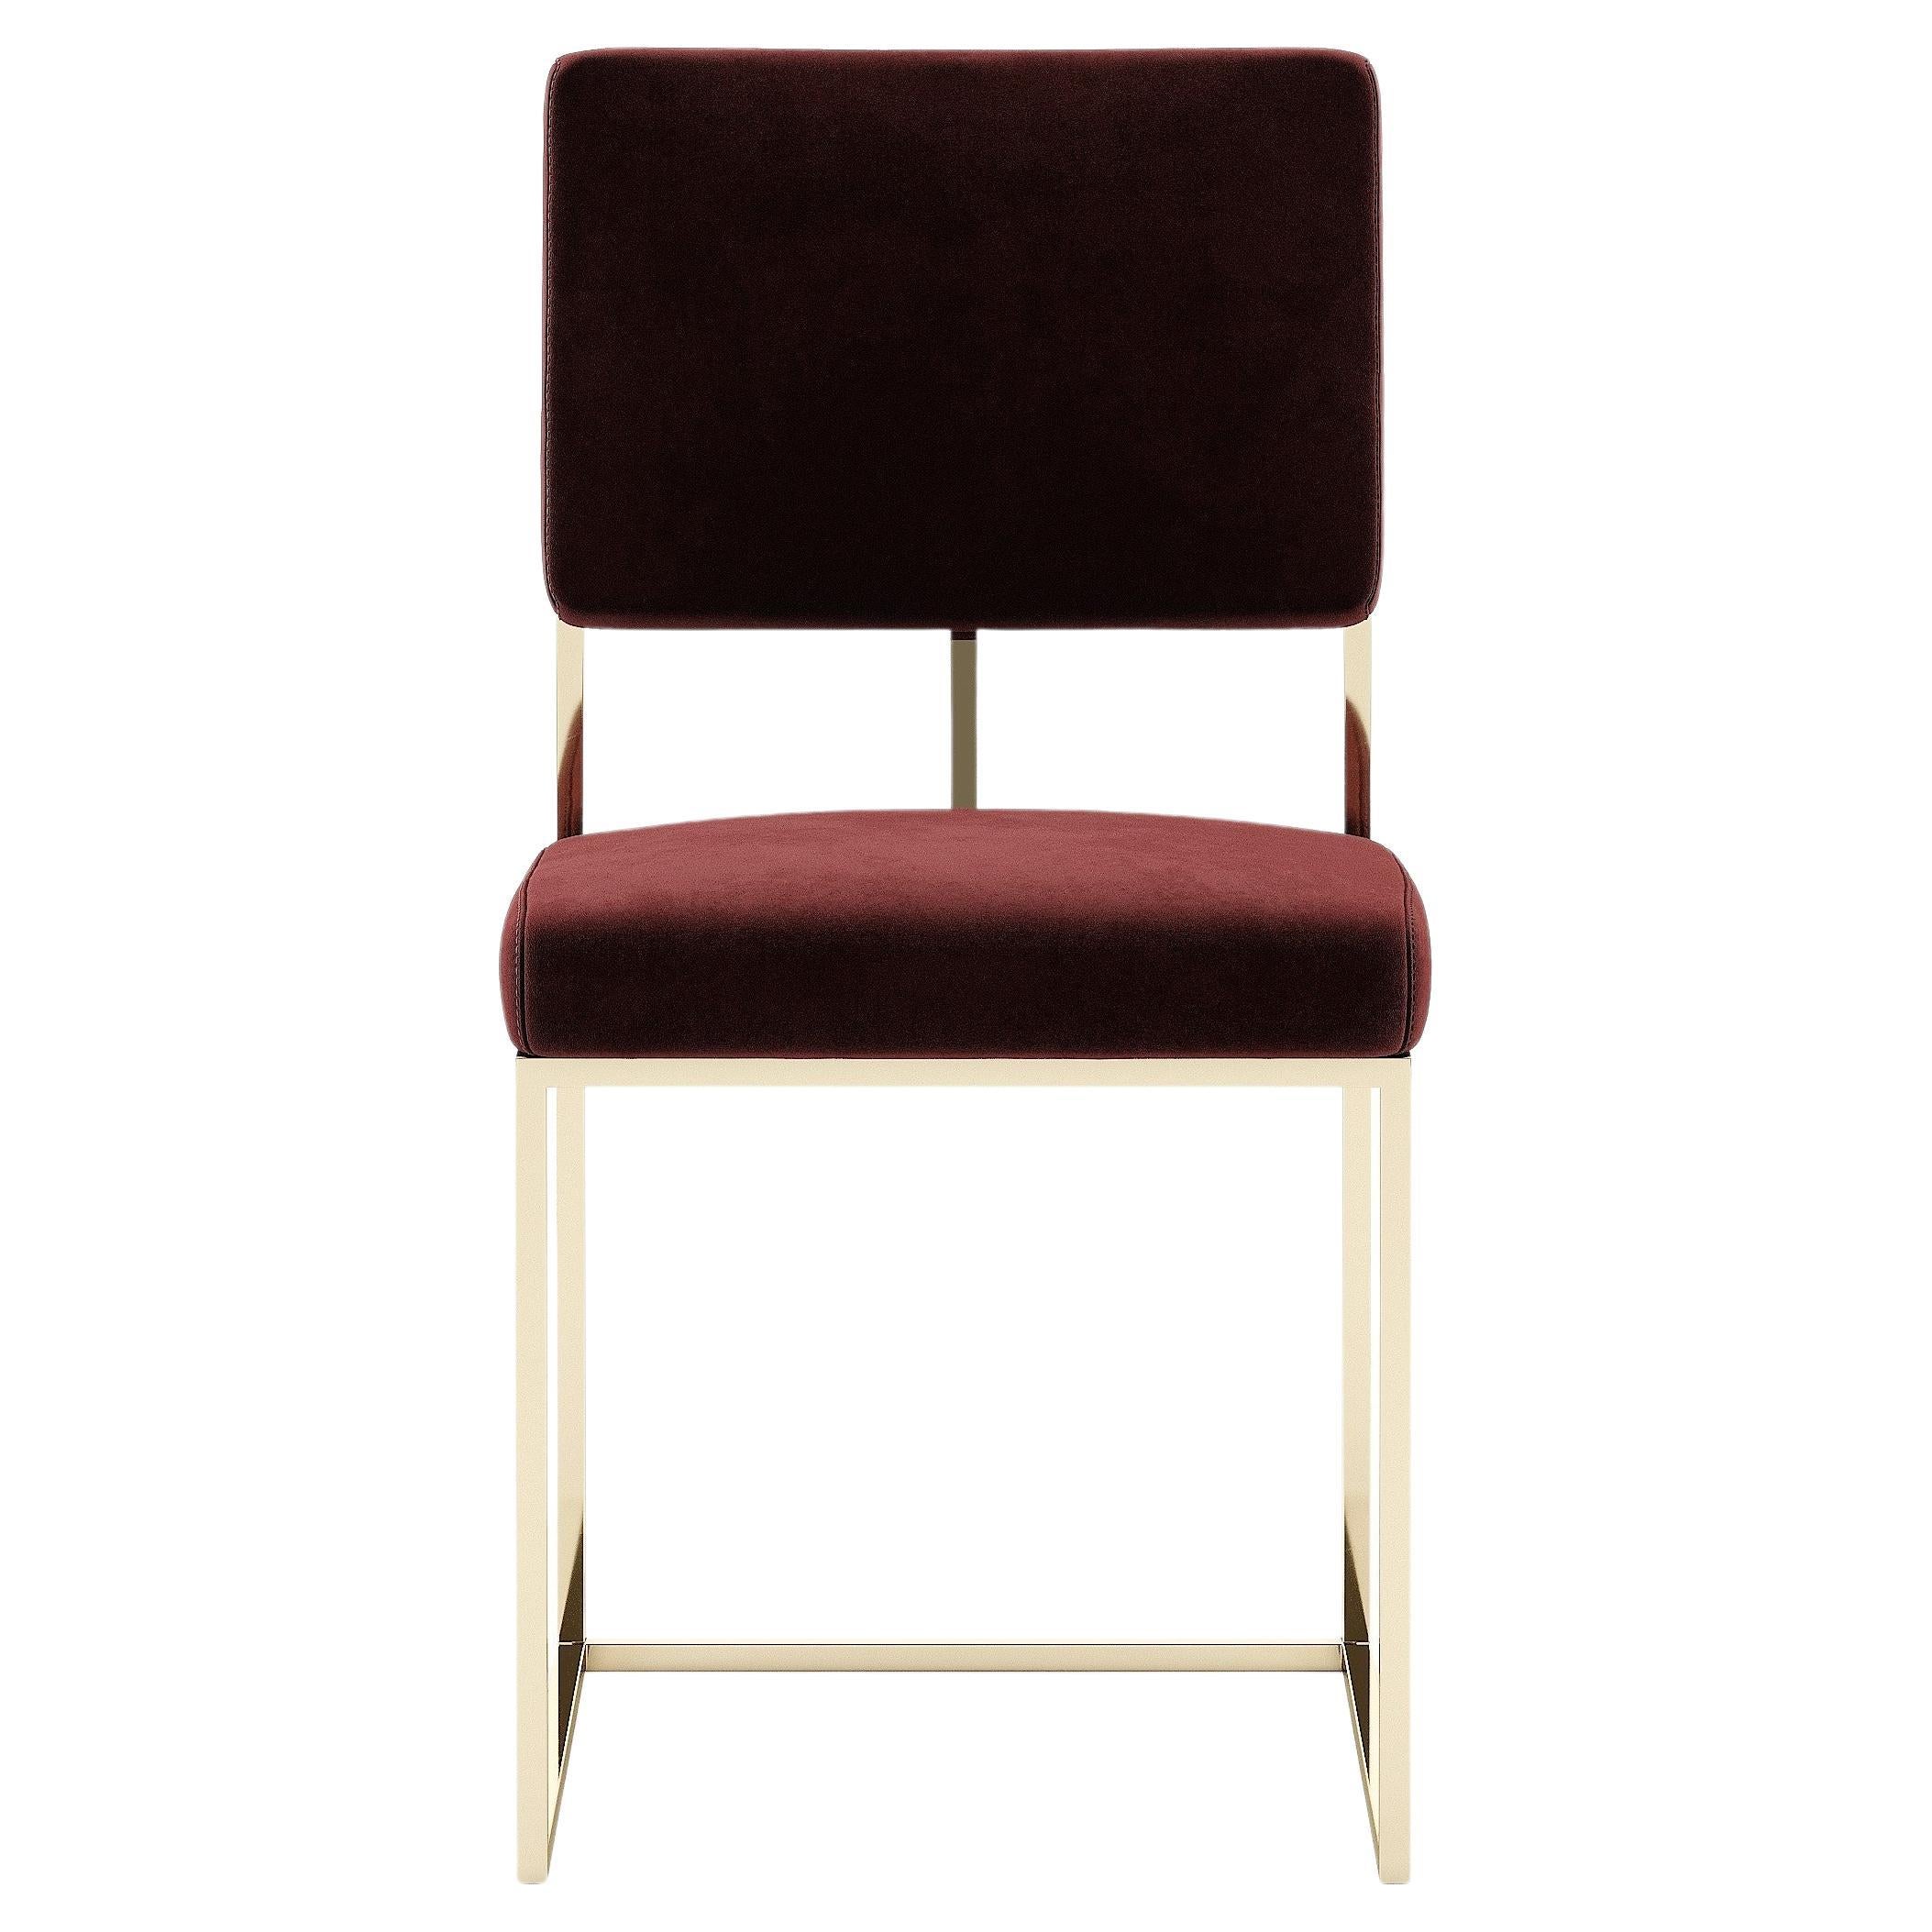 Contemporary Minimalist style dining chair featuring sleek metal legs in a satin brass tone.
Seat and back upholstered in deep Bordeaux cotton velvet.
Materials: Stainless steel, velvet.
Finishes: Satin brass, Bordeaux.
Handcrafted in